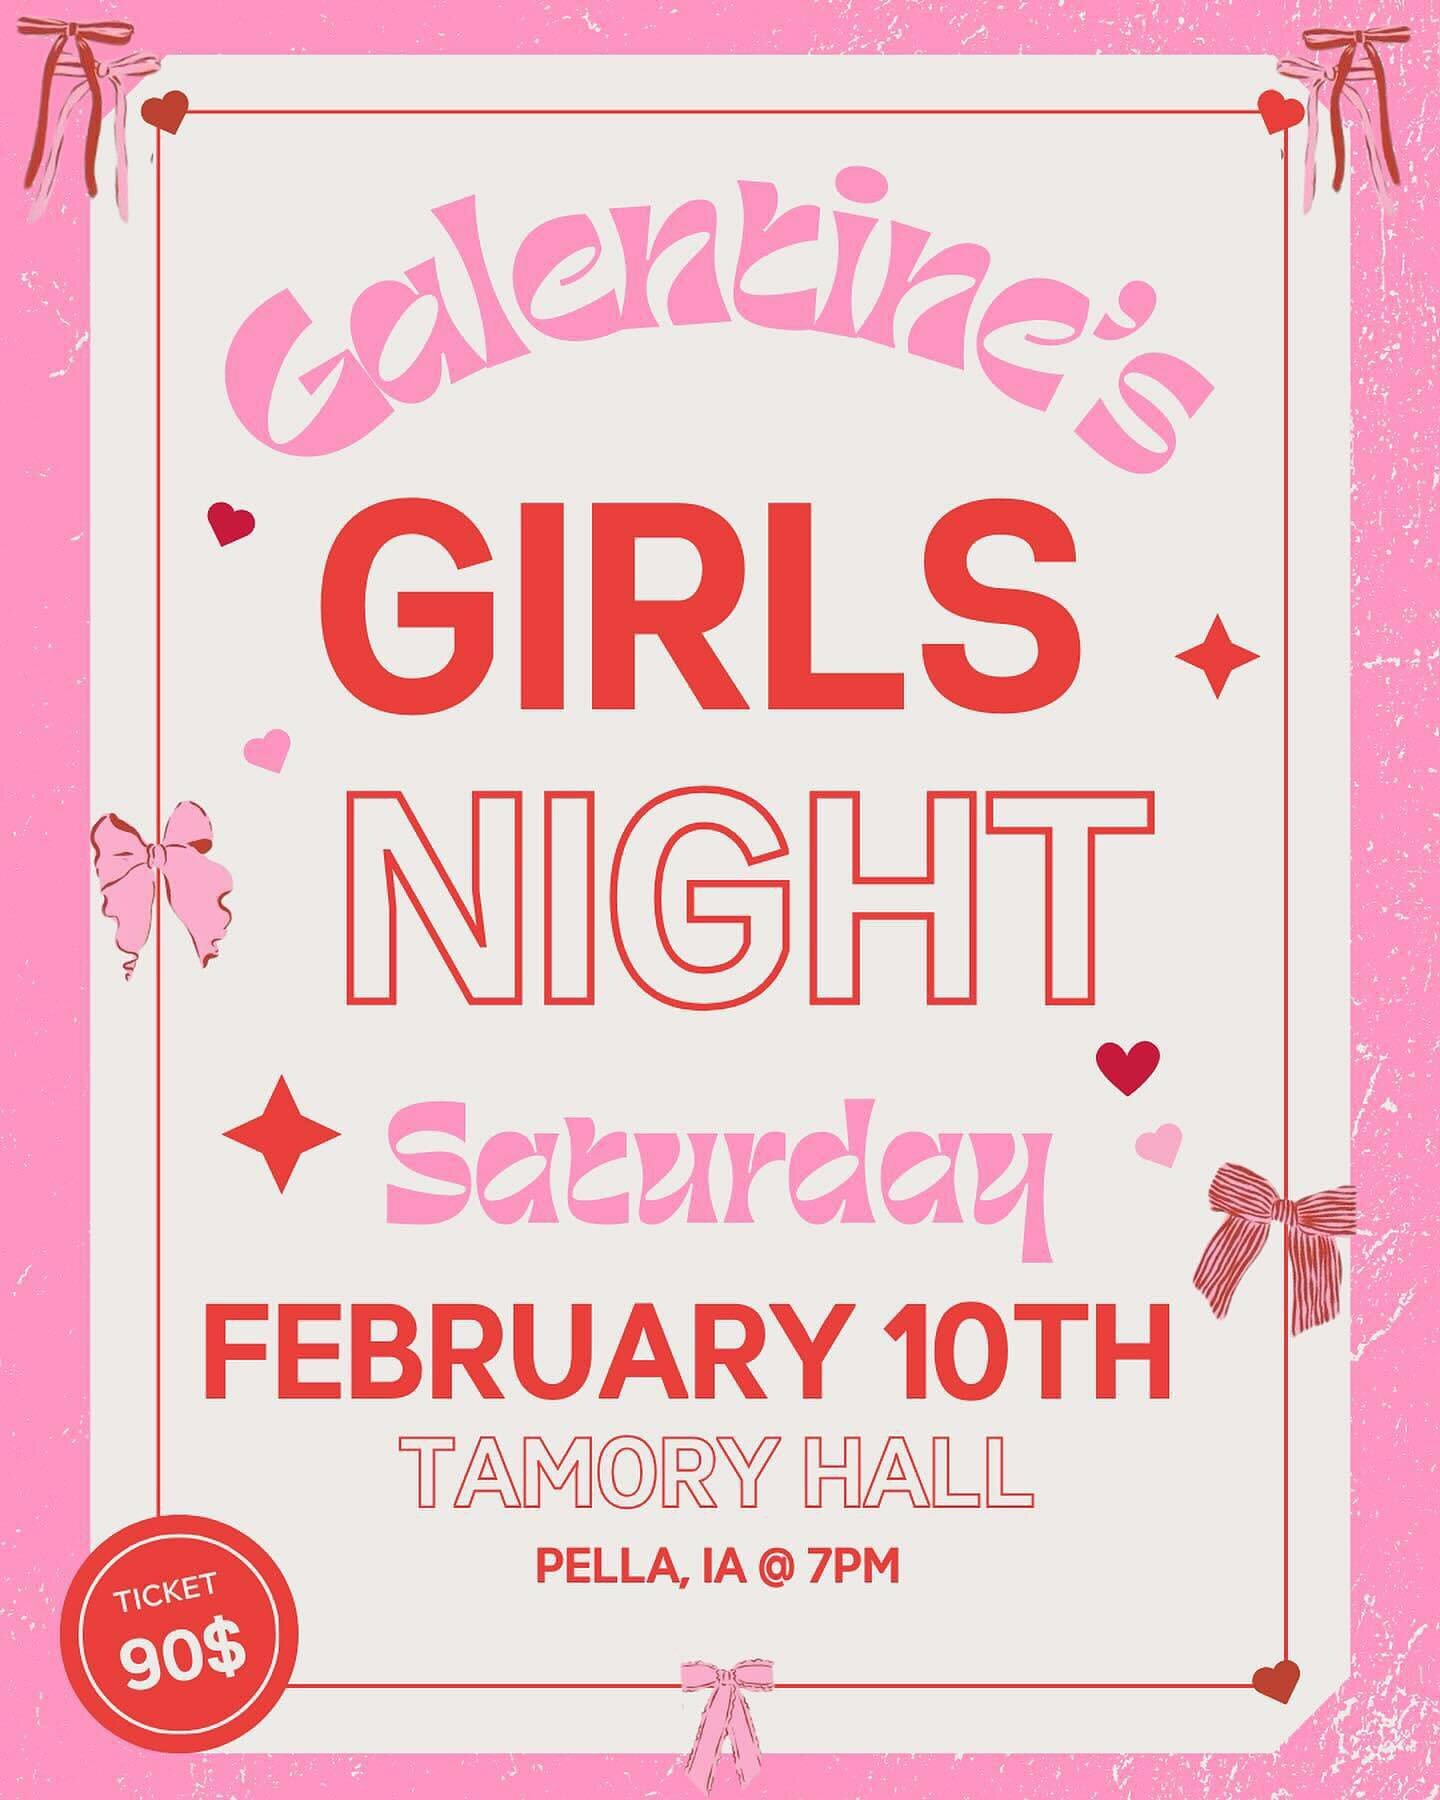 🍷 Grab your gal pals and join us at Tamory Hall on Saturday, February 10th at 7pm for a Galentine&rsquo;s charcuterie workshop + wine tasting by the lovely @charcuteriebykylie 

Ticket price gets you *everything* you need to make your own individual